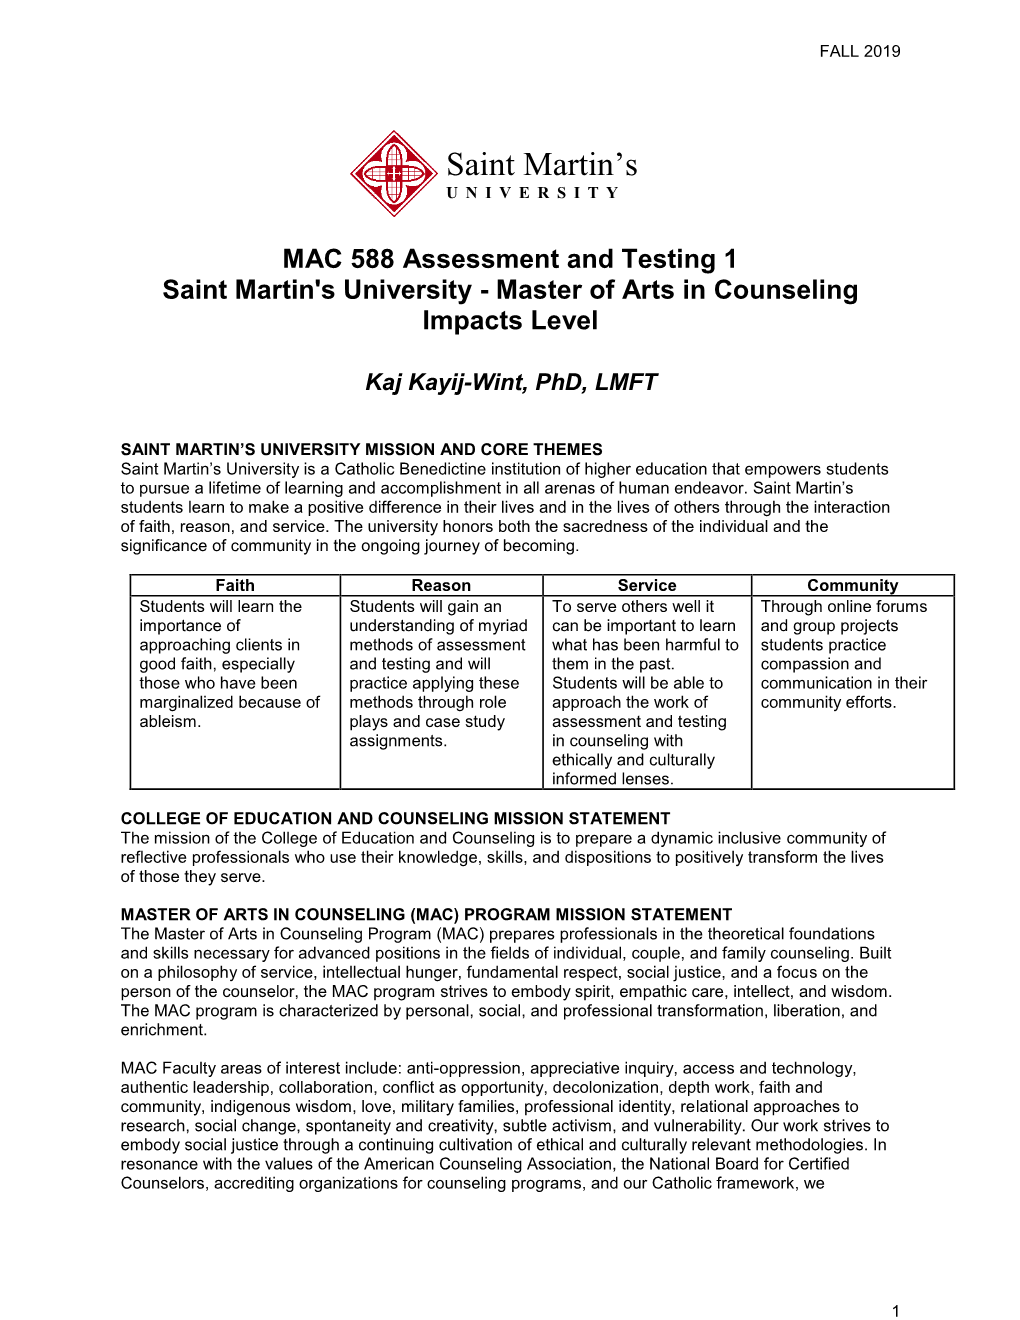 MAC 588 Assessment and Testing 1 Saint Martin's University - Master of Arts in Counseling Impacts Level